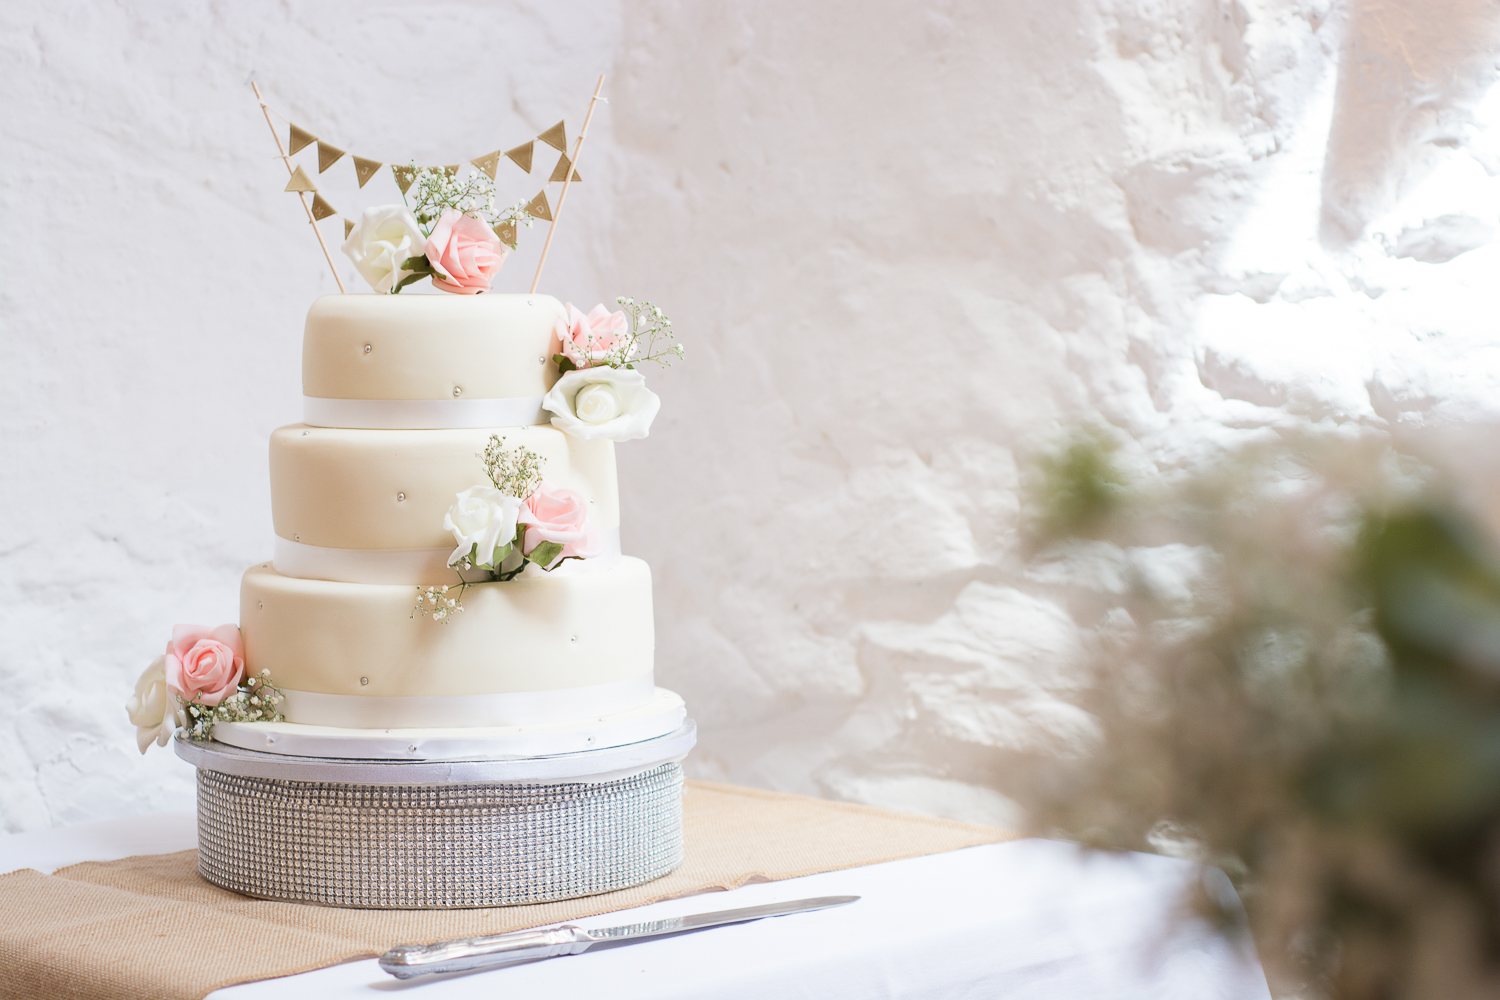 Lovely wedding cake by Ben's Bakes at the Bickley Mill Wedding Venue in Devon